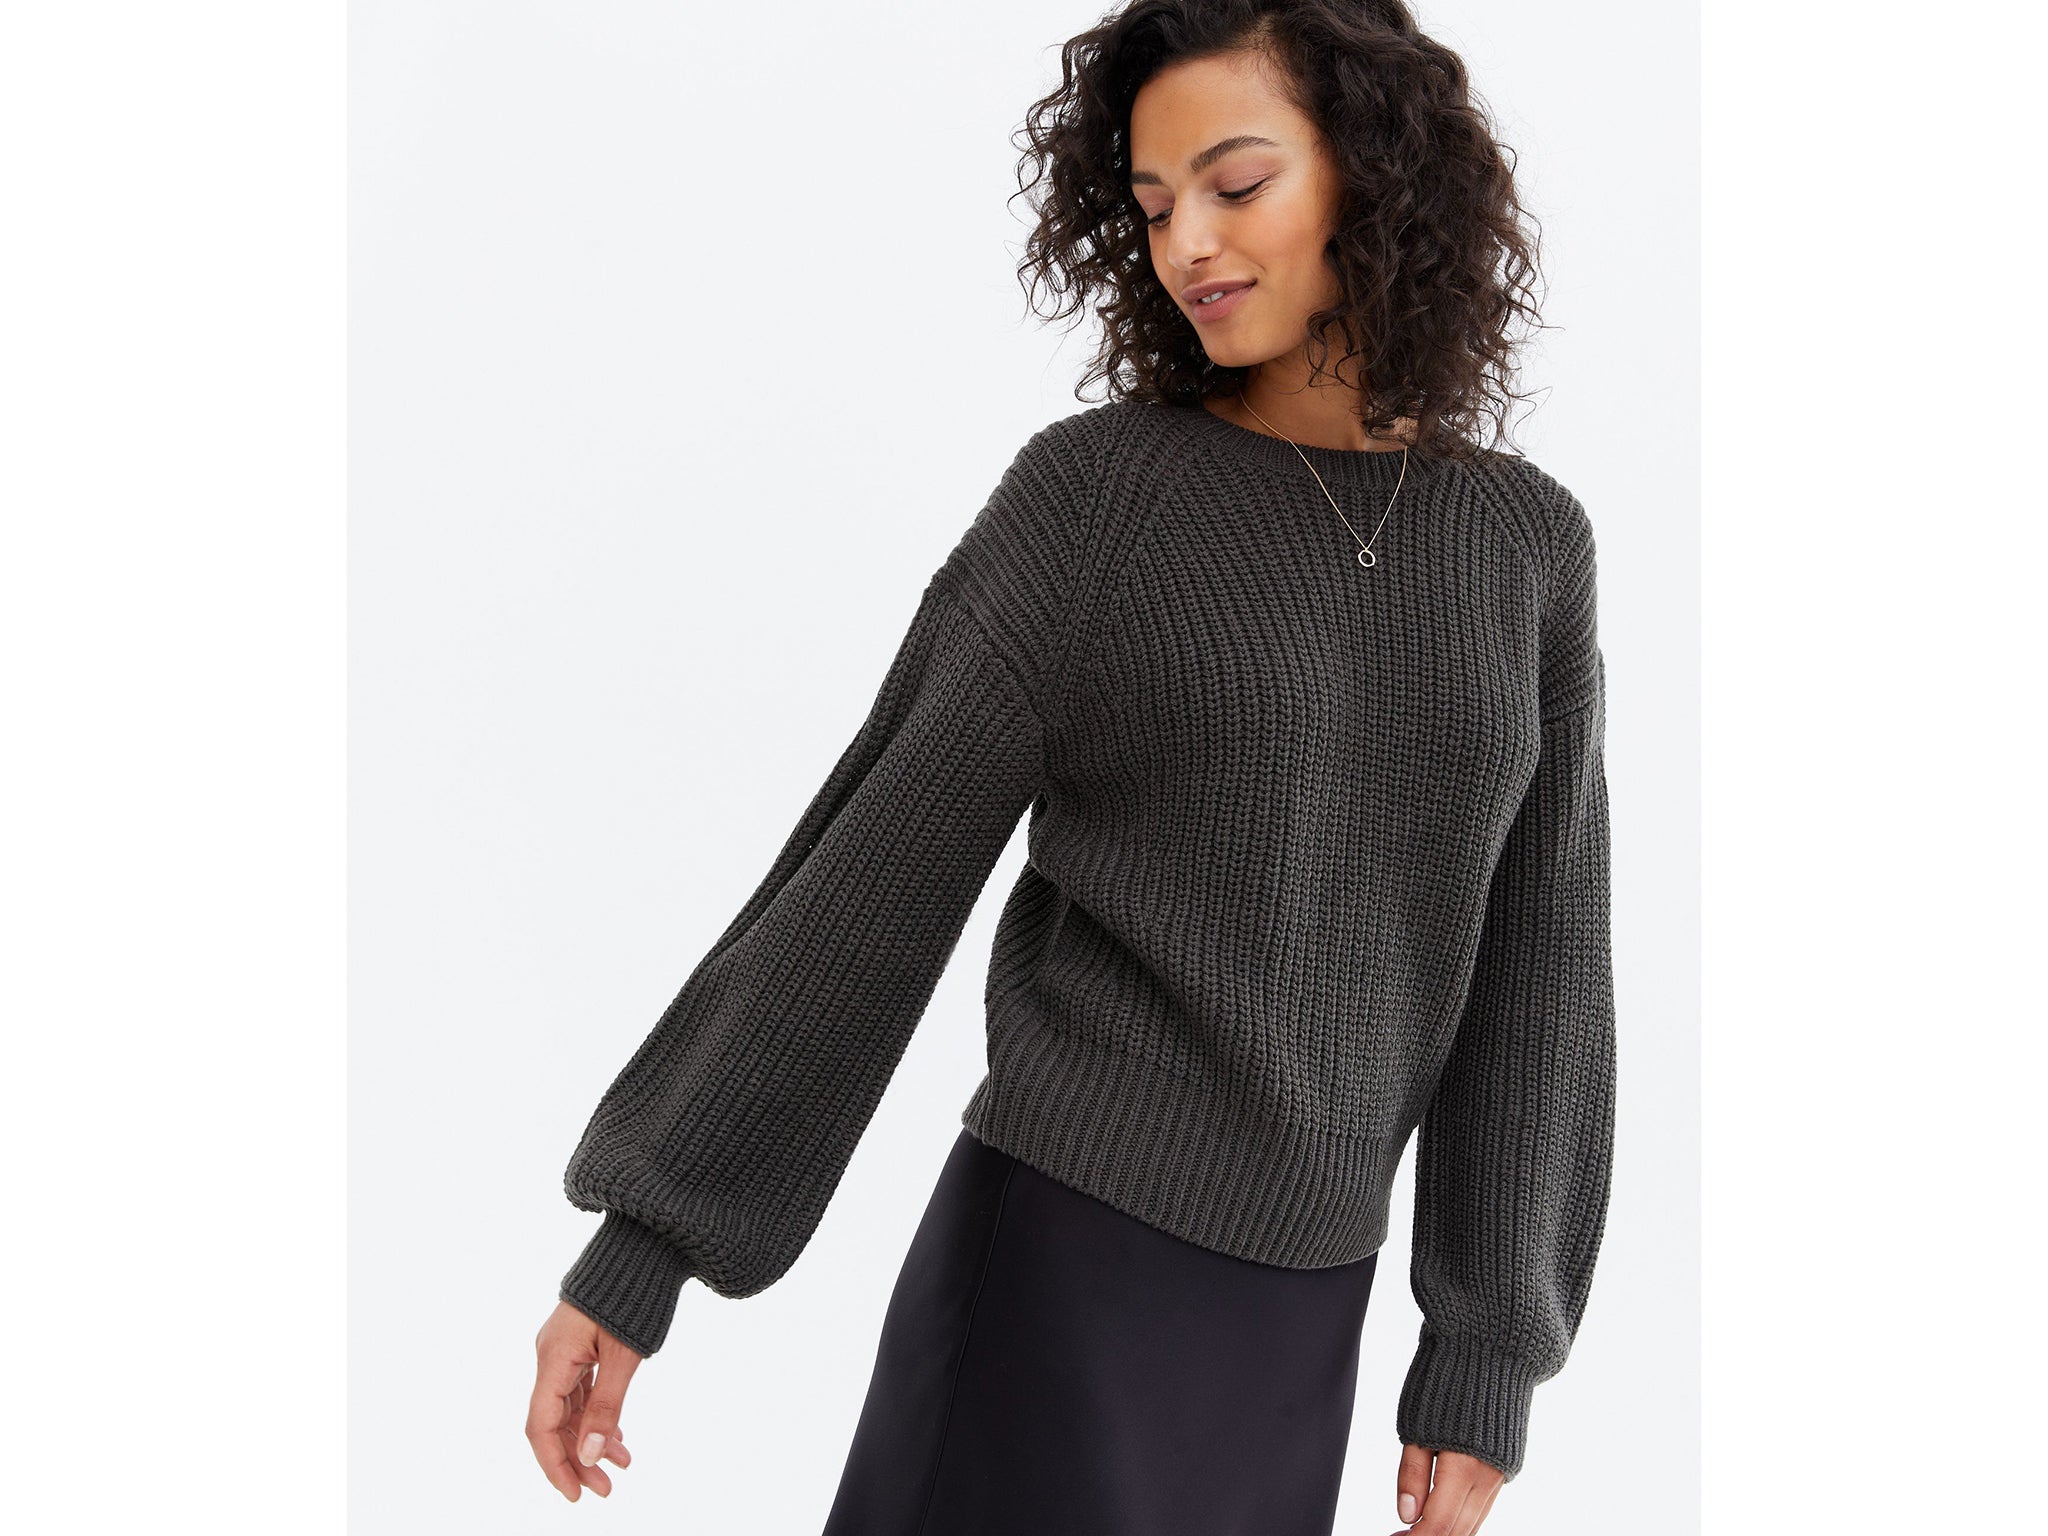 discount 40% WOMEN FASHION Jumpers & Sweatshirts Oversize Missguided jumper Gray 